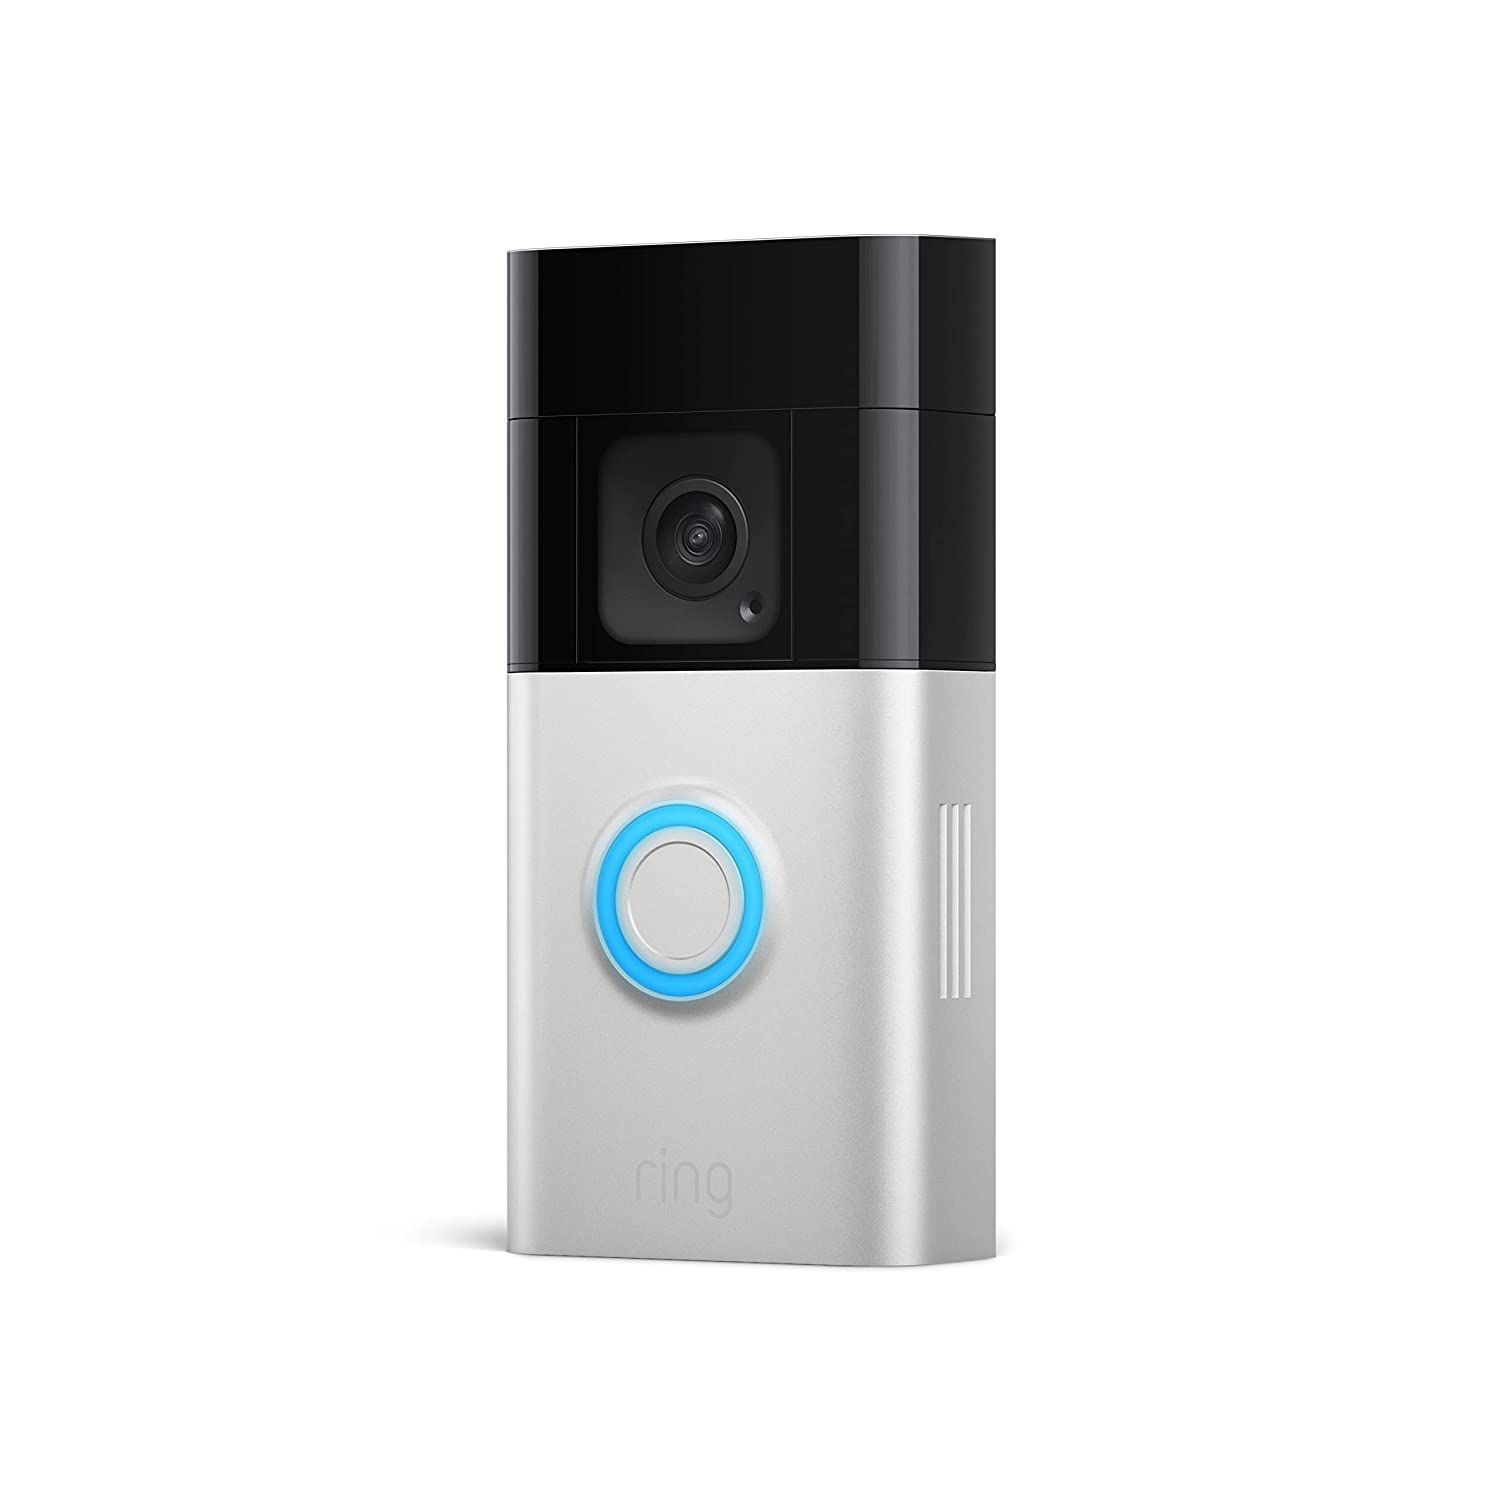 The Ring Video Doorbell Plus against a white background